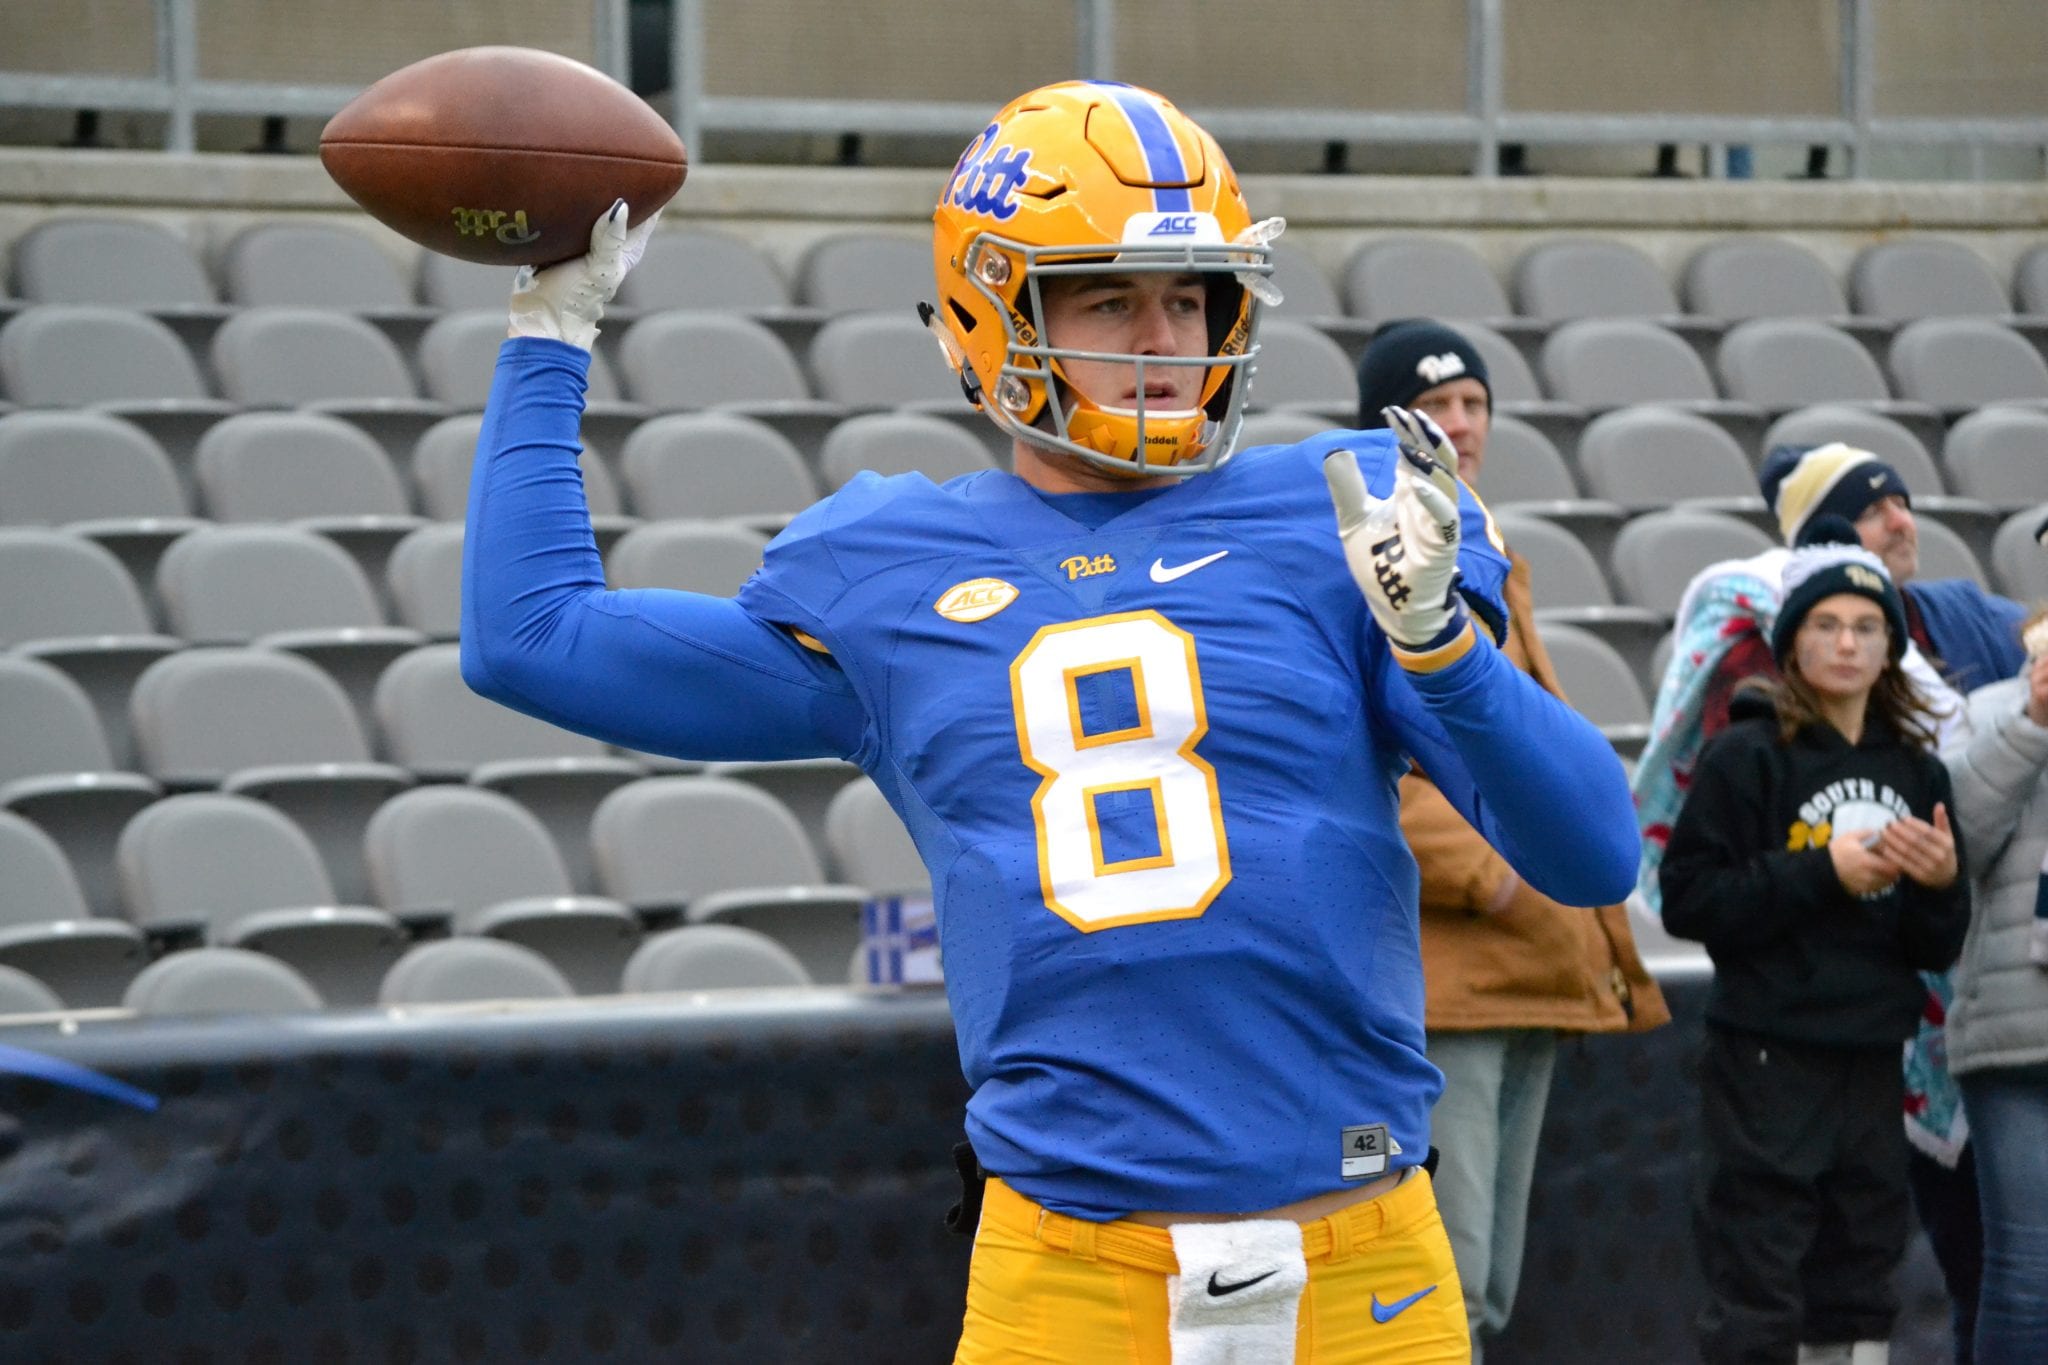 Pitt Passing Game Looking for Fixes, not Drastic Change | Pittsburgh Sports Now2048 x 1365